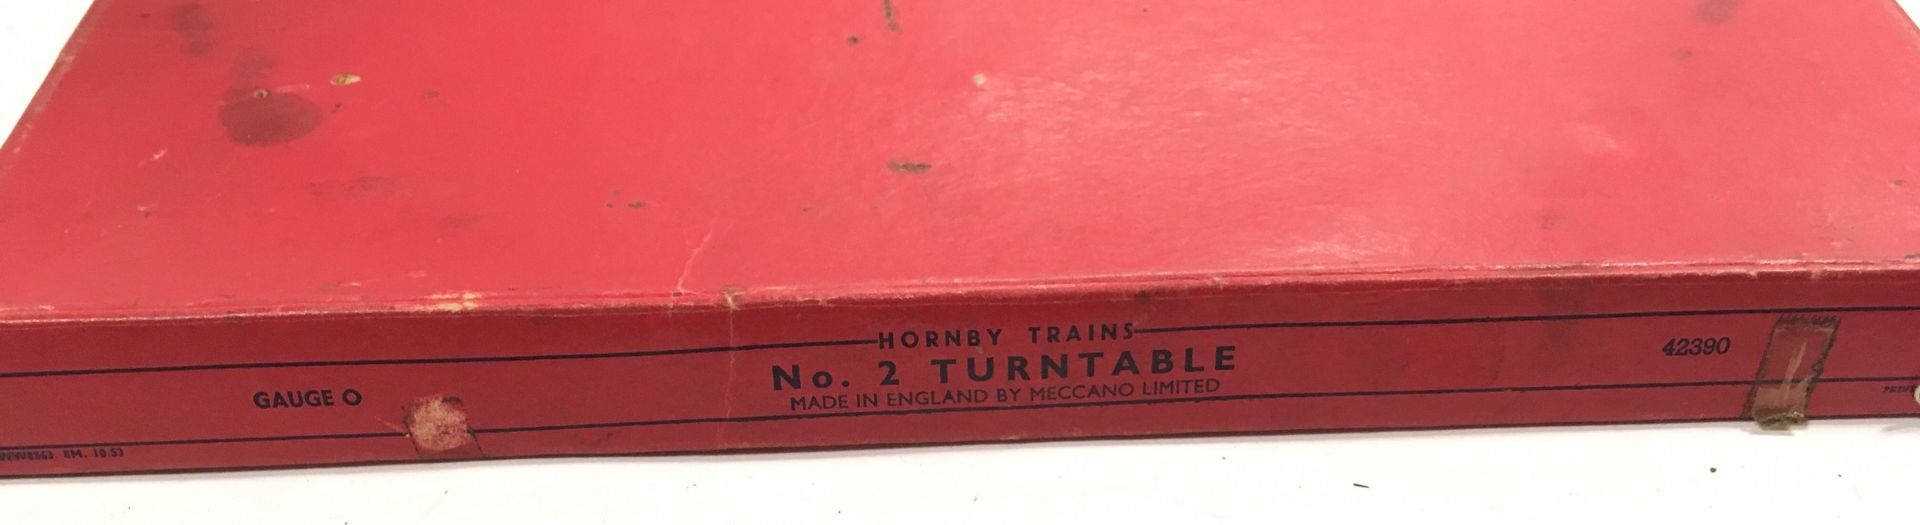 Hornby Trains No.2 turntable. - Image 2 of 2